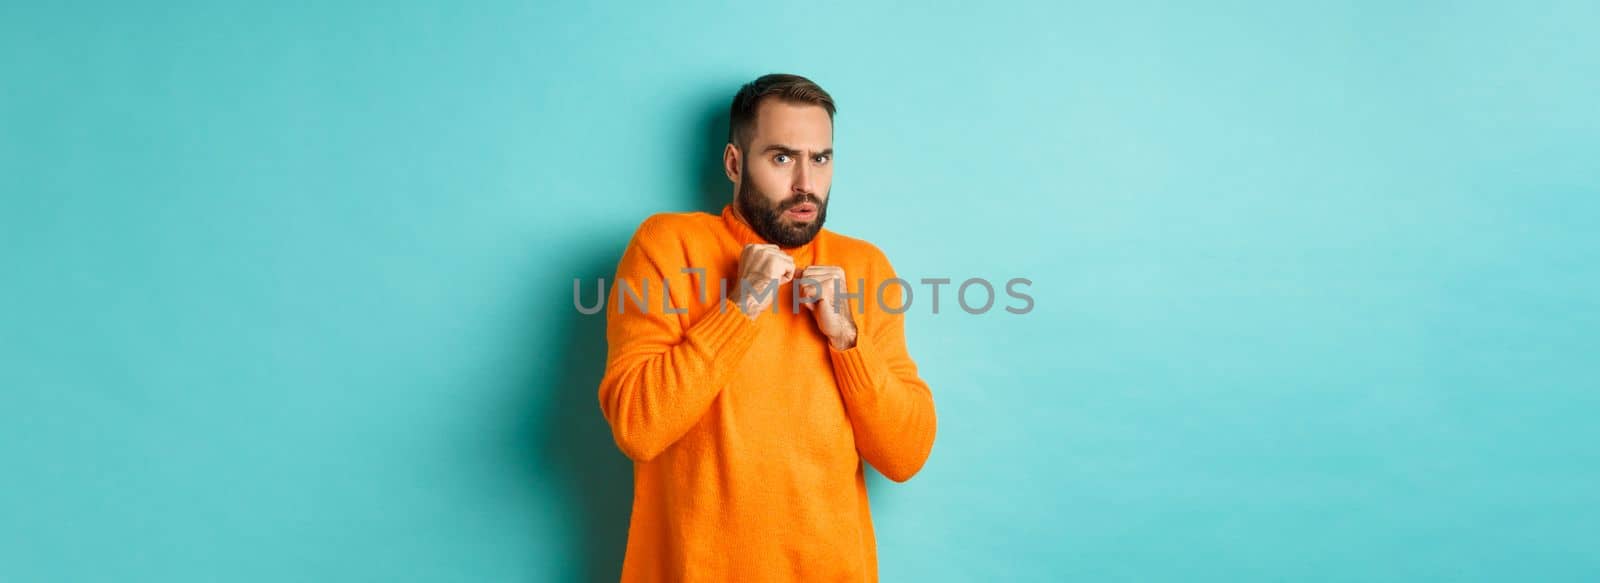 Scared guy jumping startled, looking at something scary, standing in orange sweater, studio background.